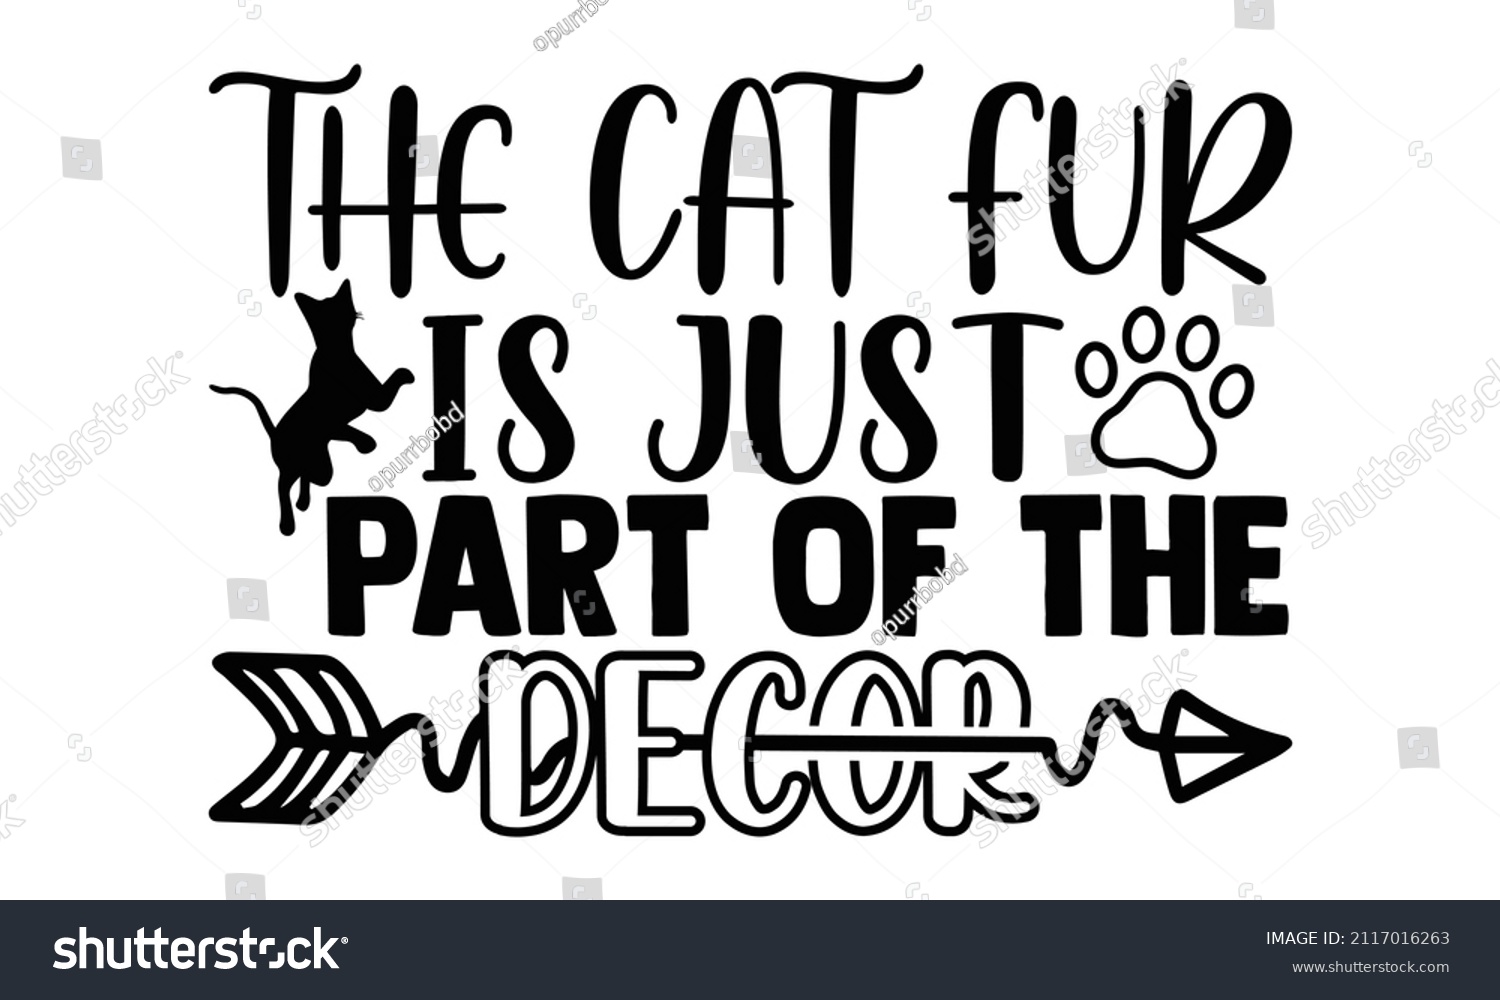 SVG of The cat fur is just part of the decor- Cat t-shirt design, Hand drawn lettering phrase, Calligraphy t-shirt design, Isolated on white background, Handwritten vector sign, SVG, EPS 10 svg